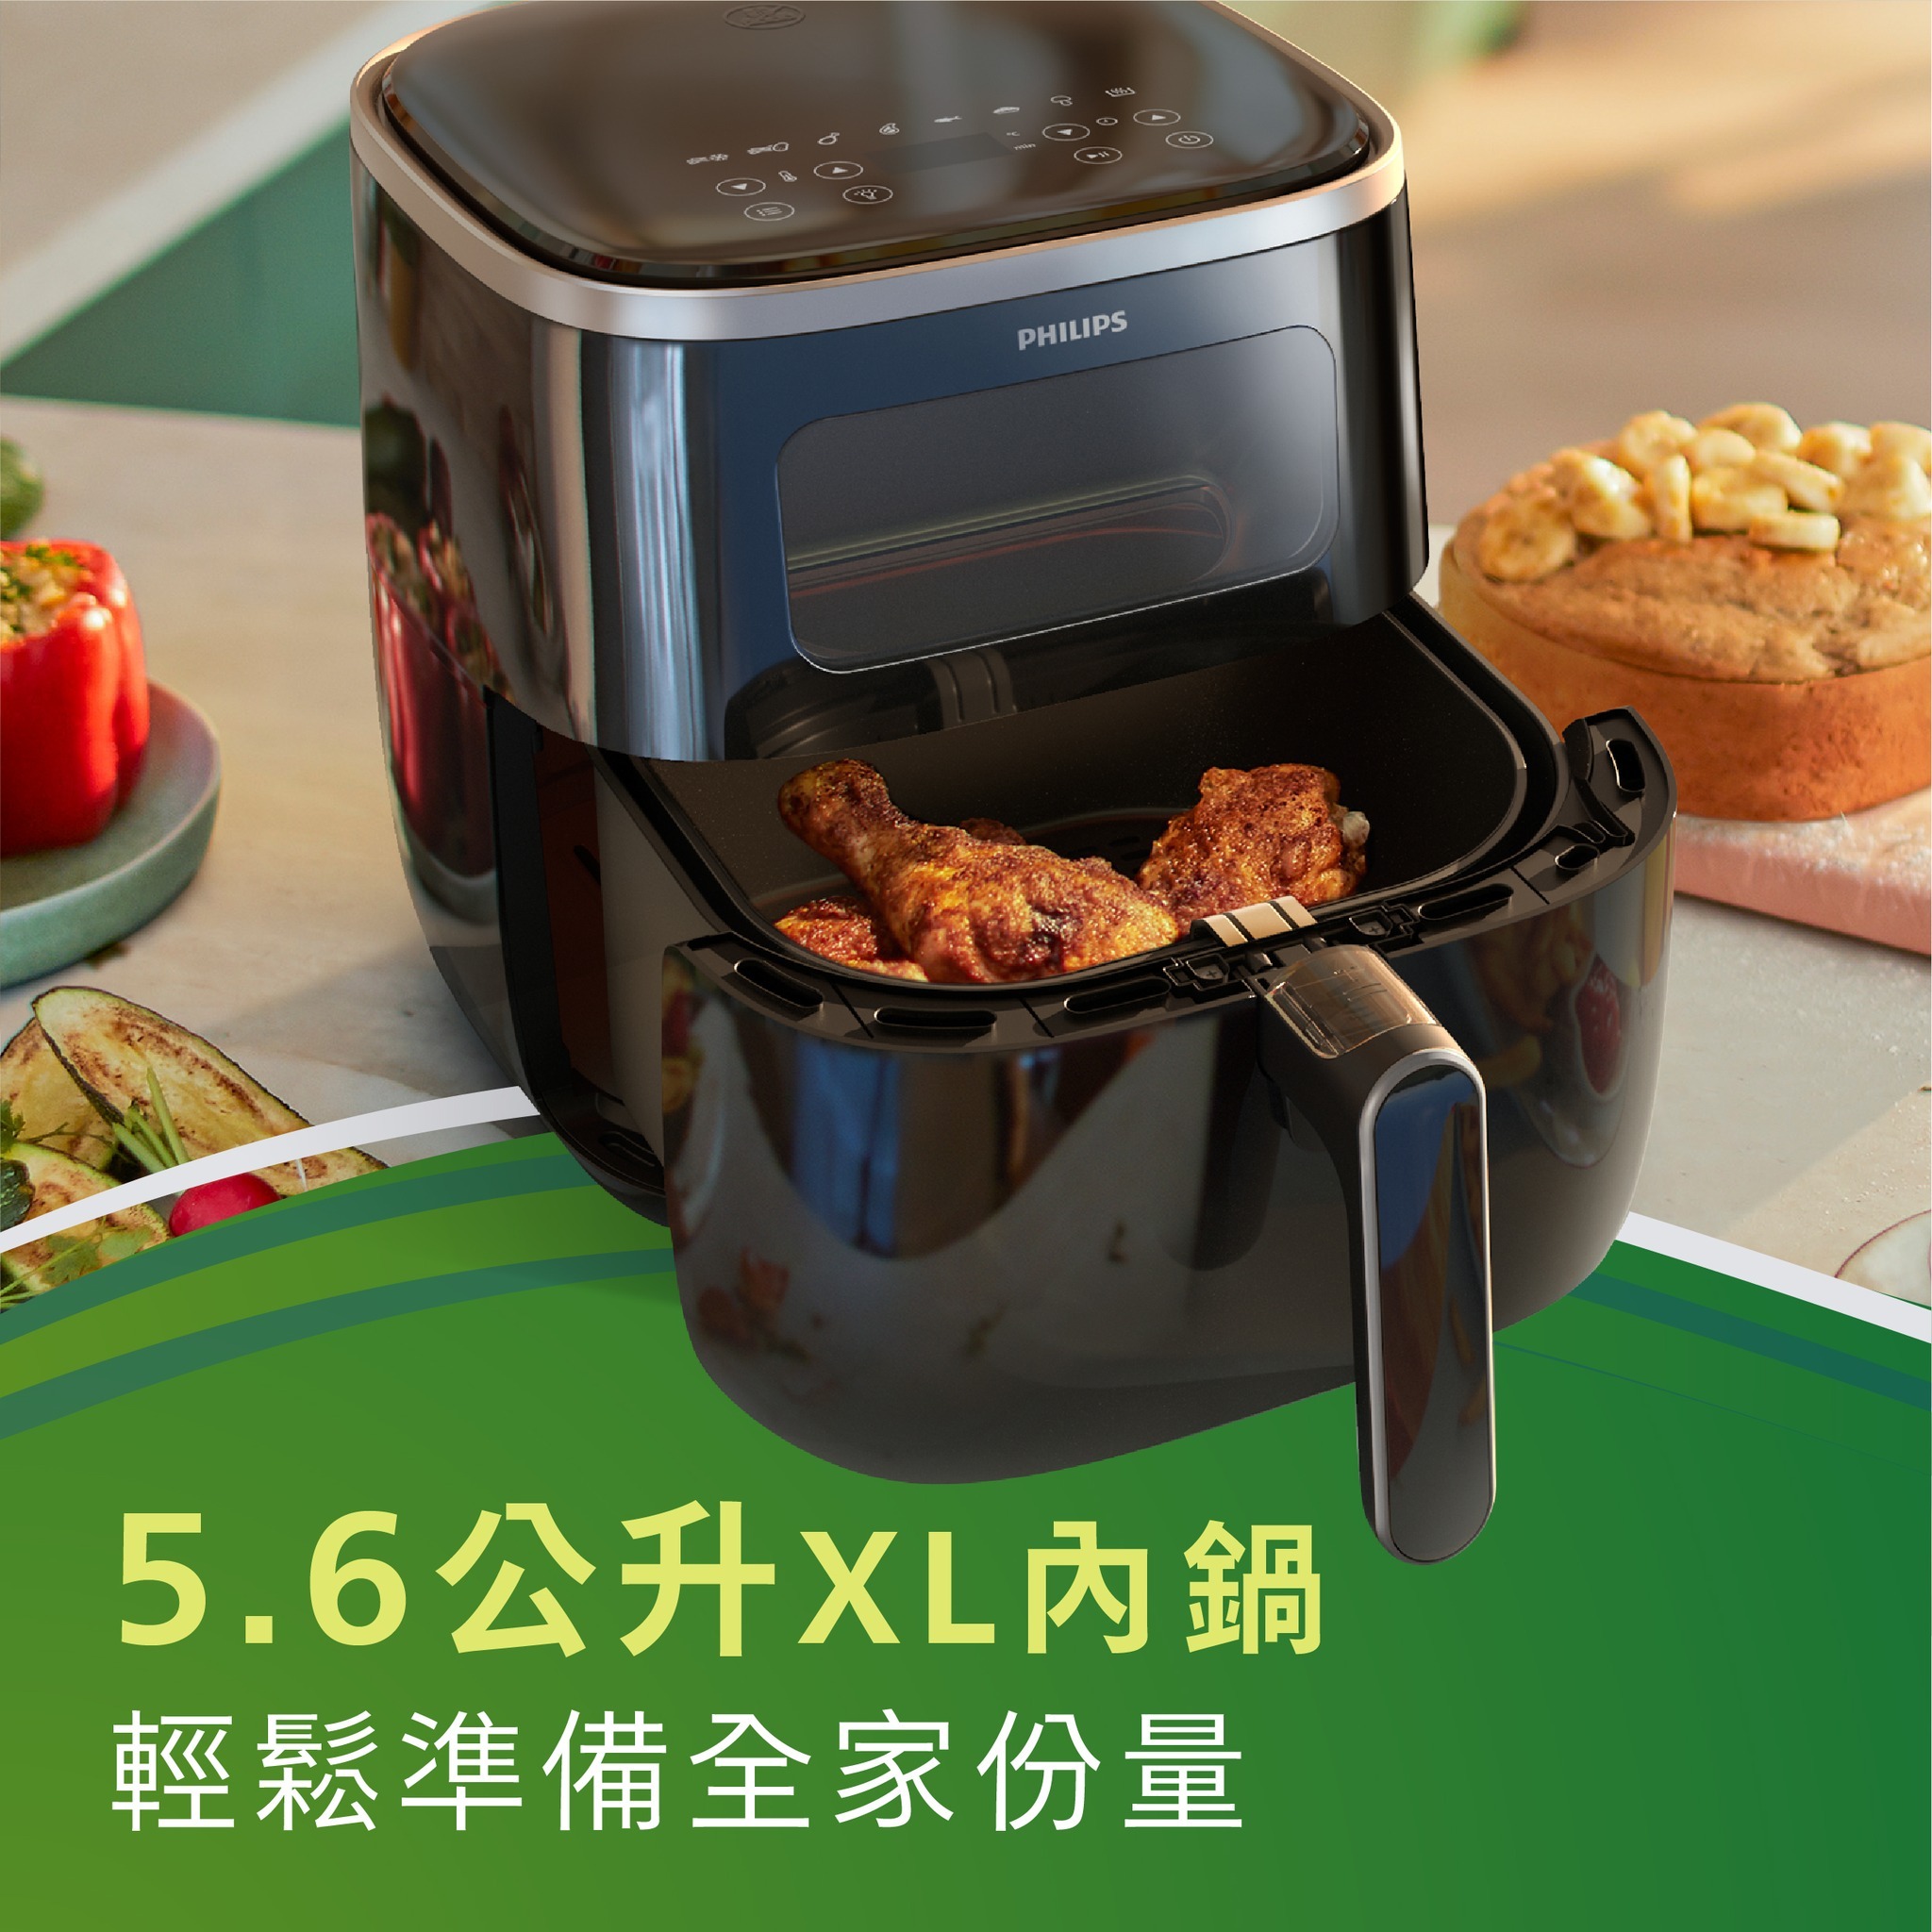 philips 3000 series 5.6L airfryer with window 